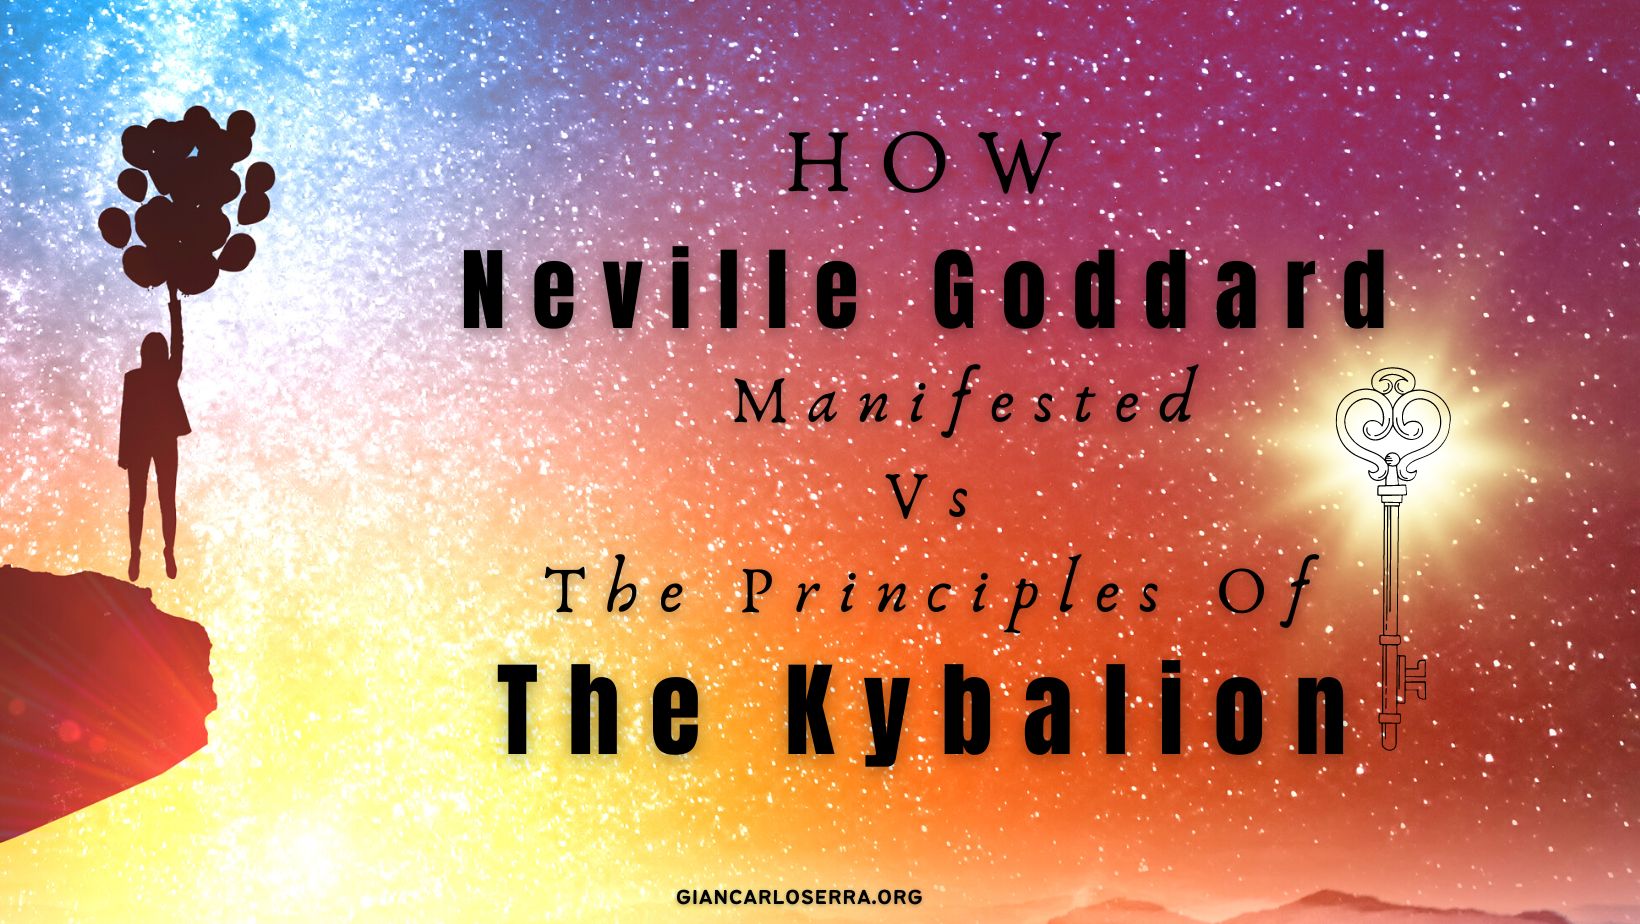 How Neville Goddard Manifested Vs The Principles Of The Kybalion